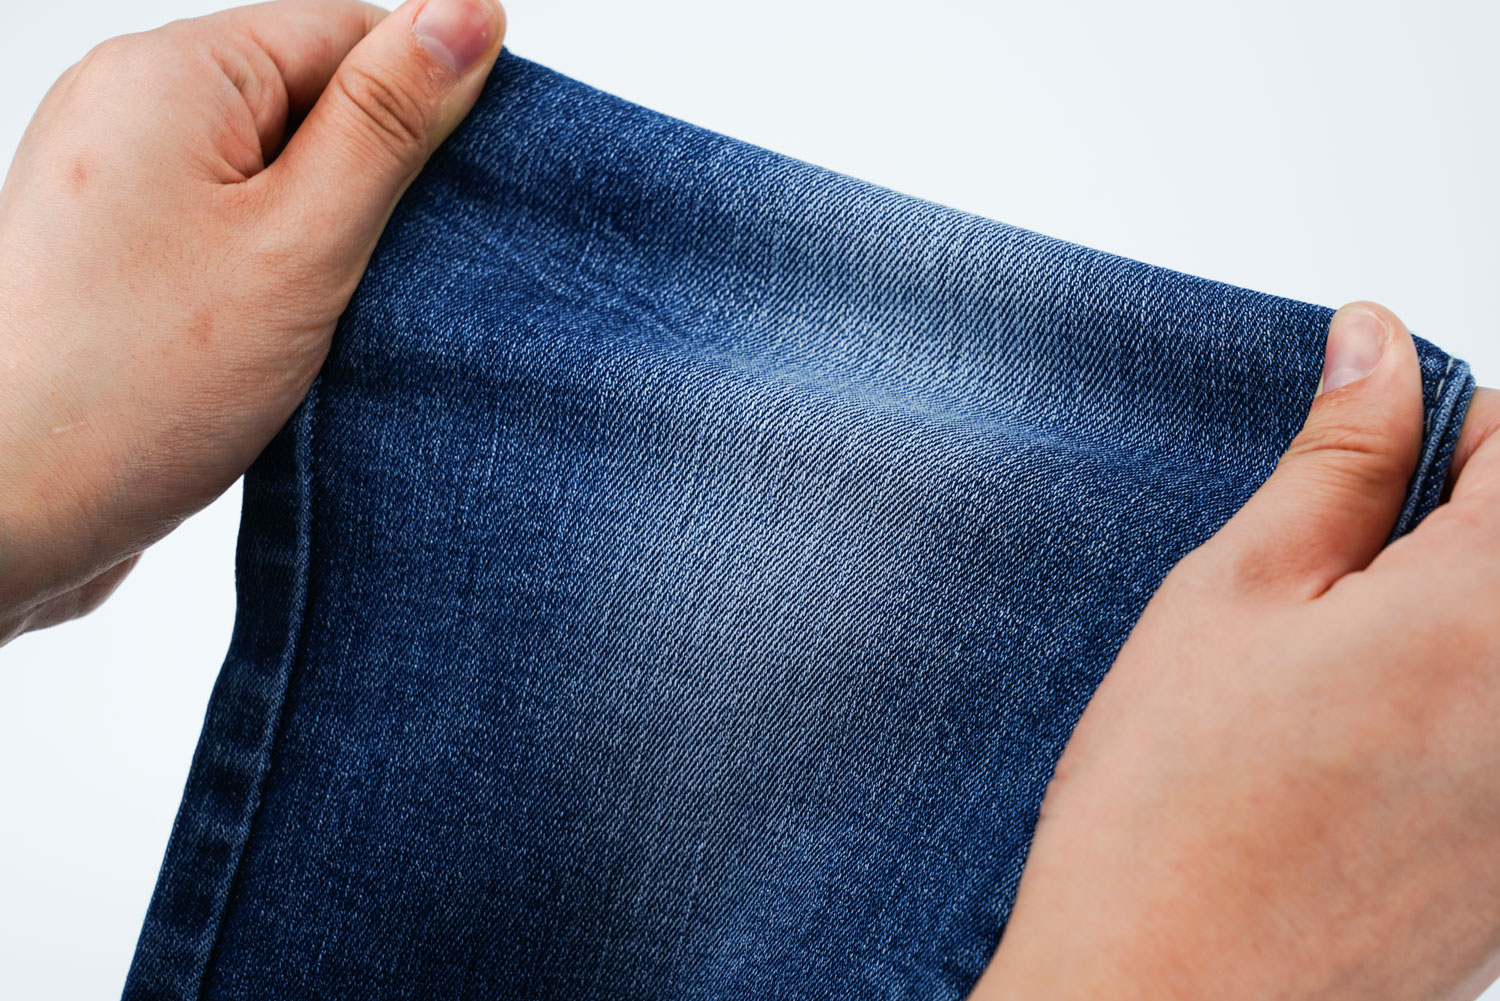 What You Should Know Before Spending Money on Mens Ripped Denim Jeans 1